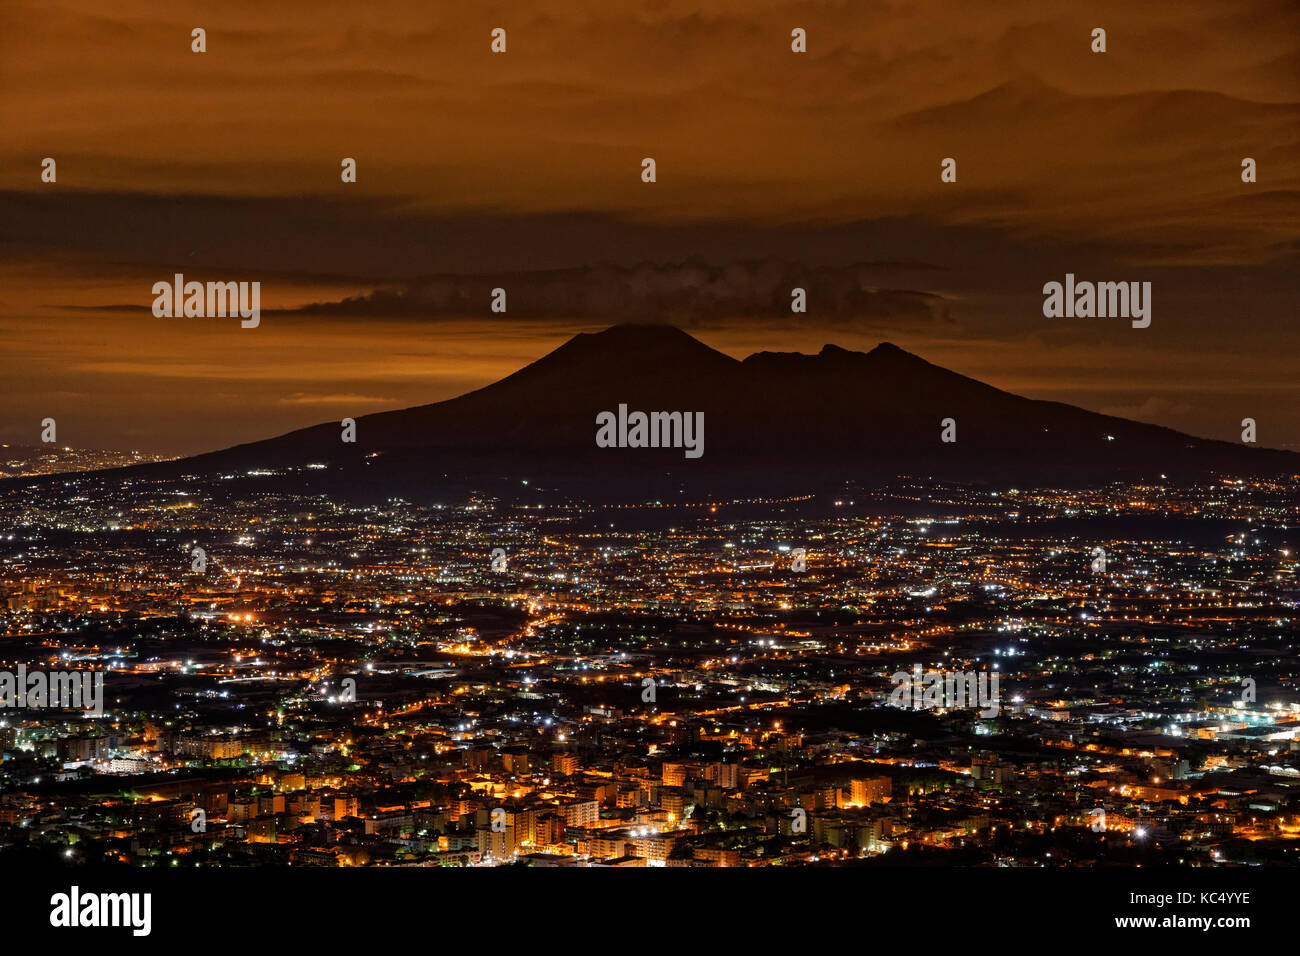 Mount Vesuvius silhouetted by the glow from the Naples conurbation in Campania Province, Southern Italy. Stock Photo